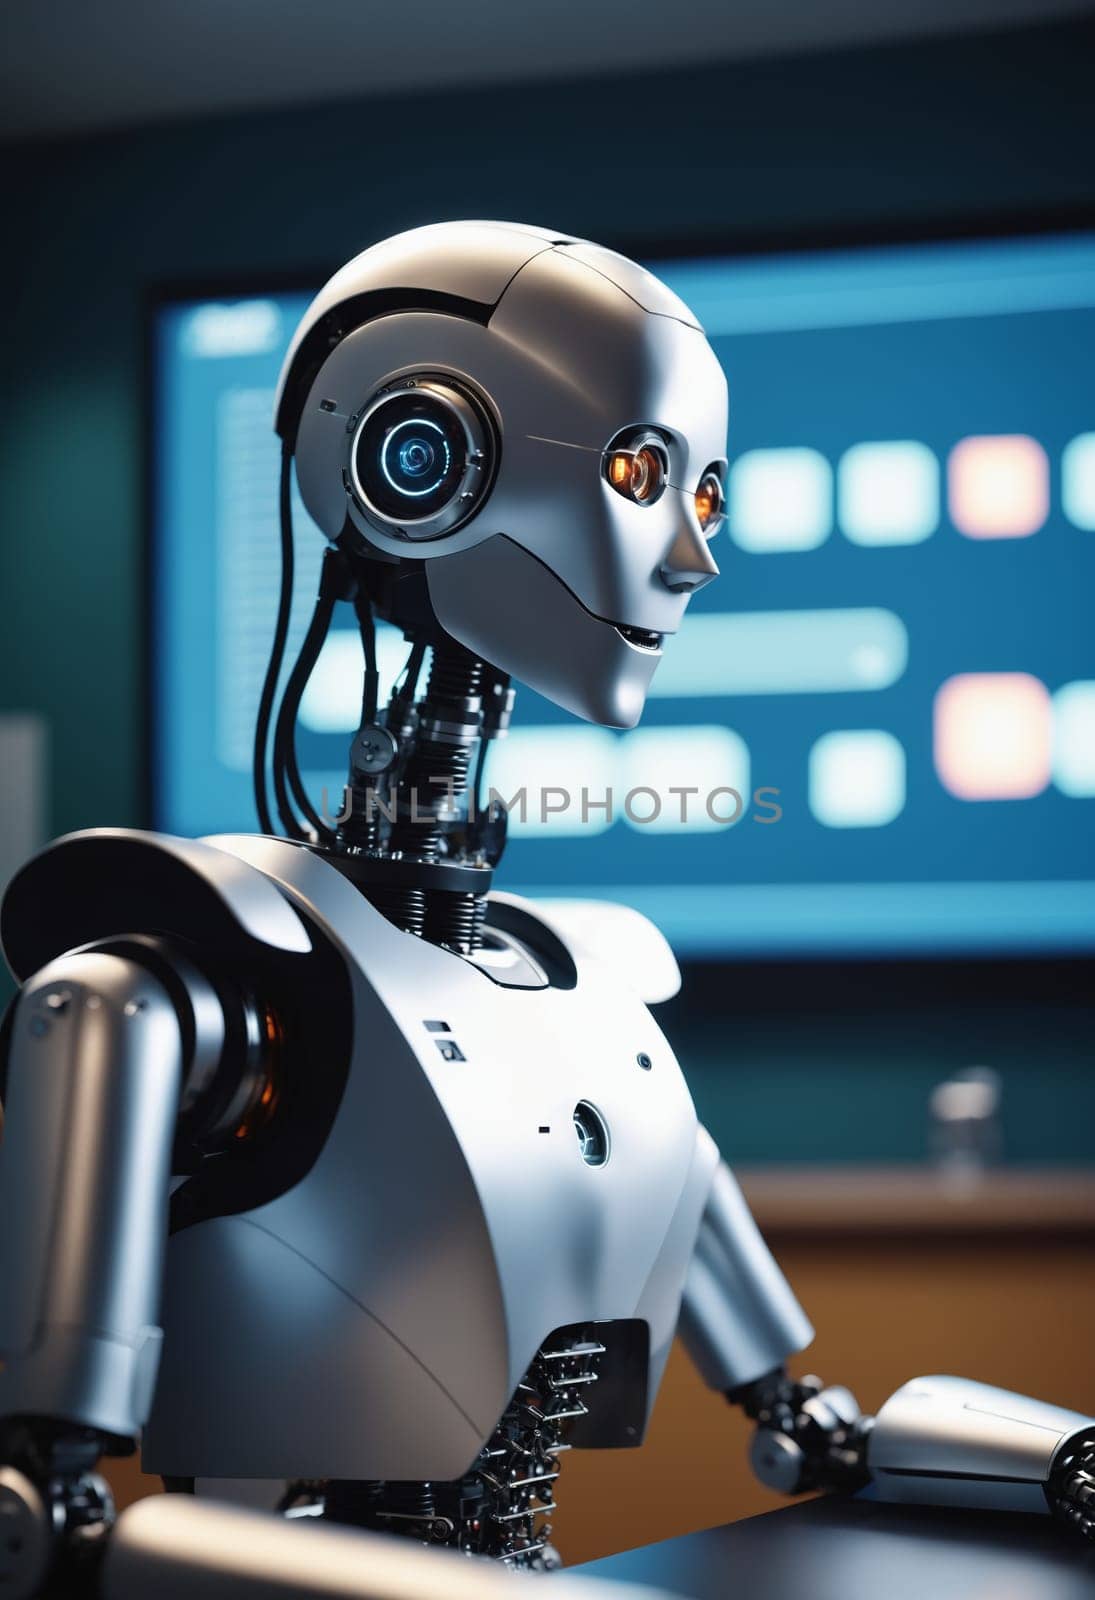 A robot is sitting at a desk in a classroom, equipped with a display device and audio equipment. It is wearing personal protective equipment, resembling a fictional character, engaging in recreation